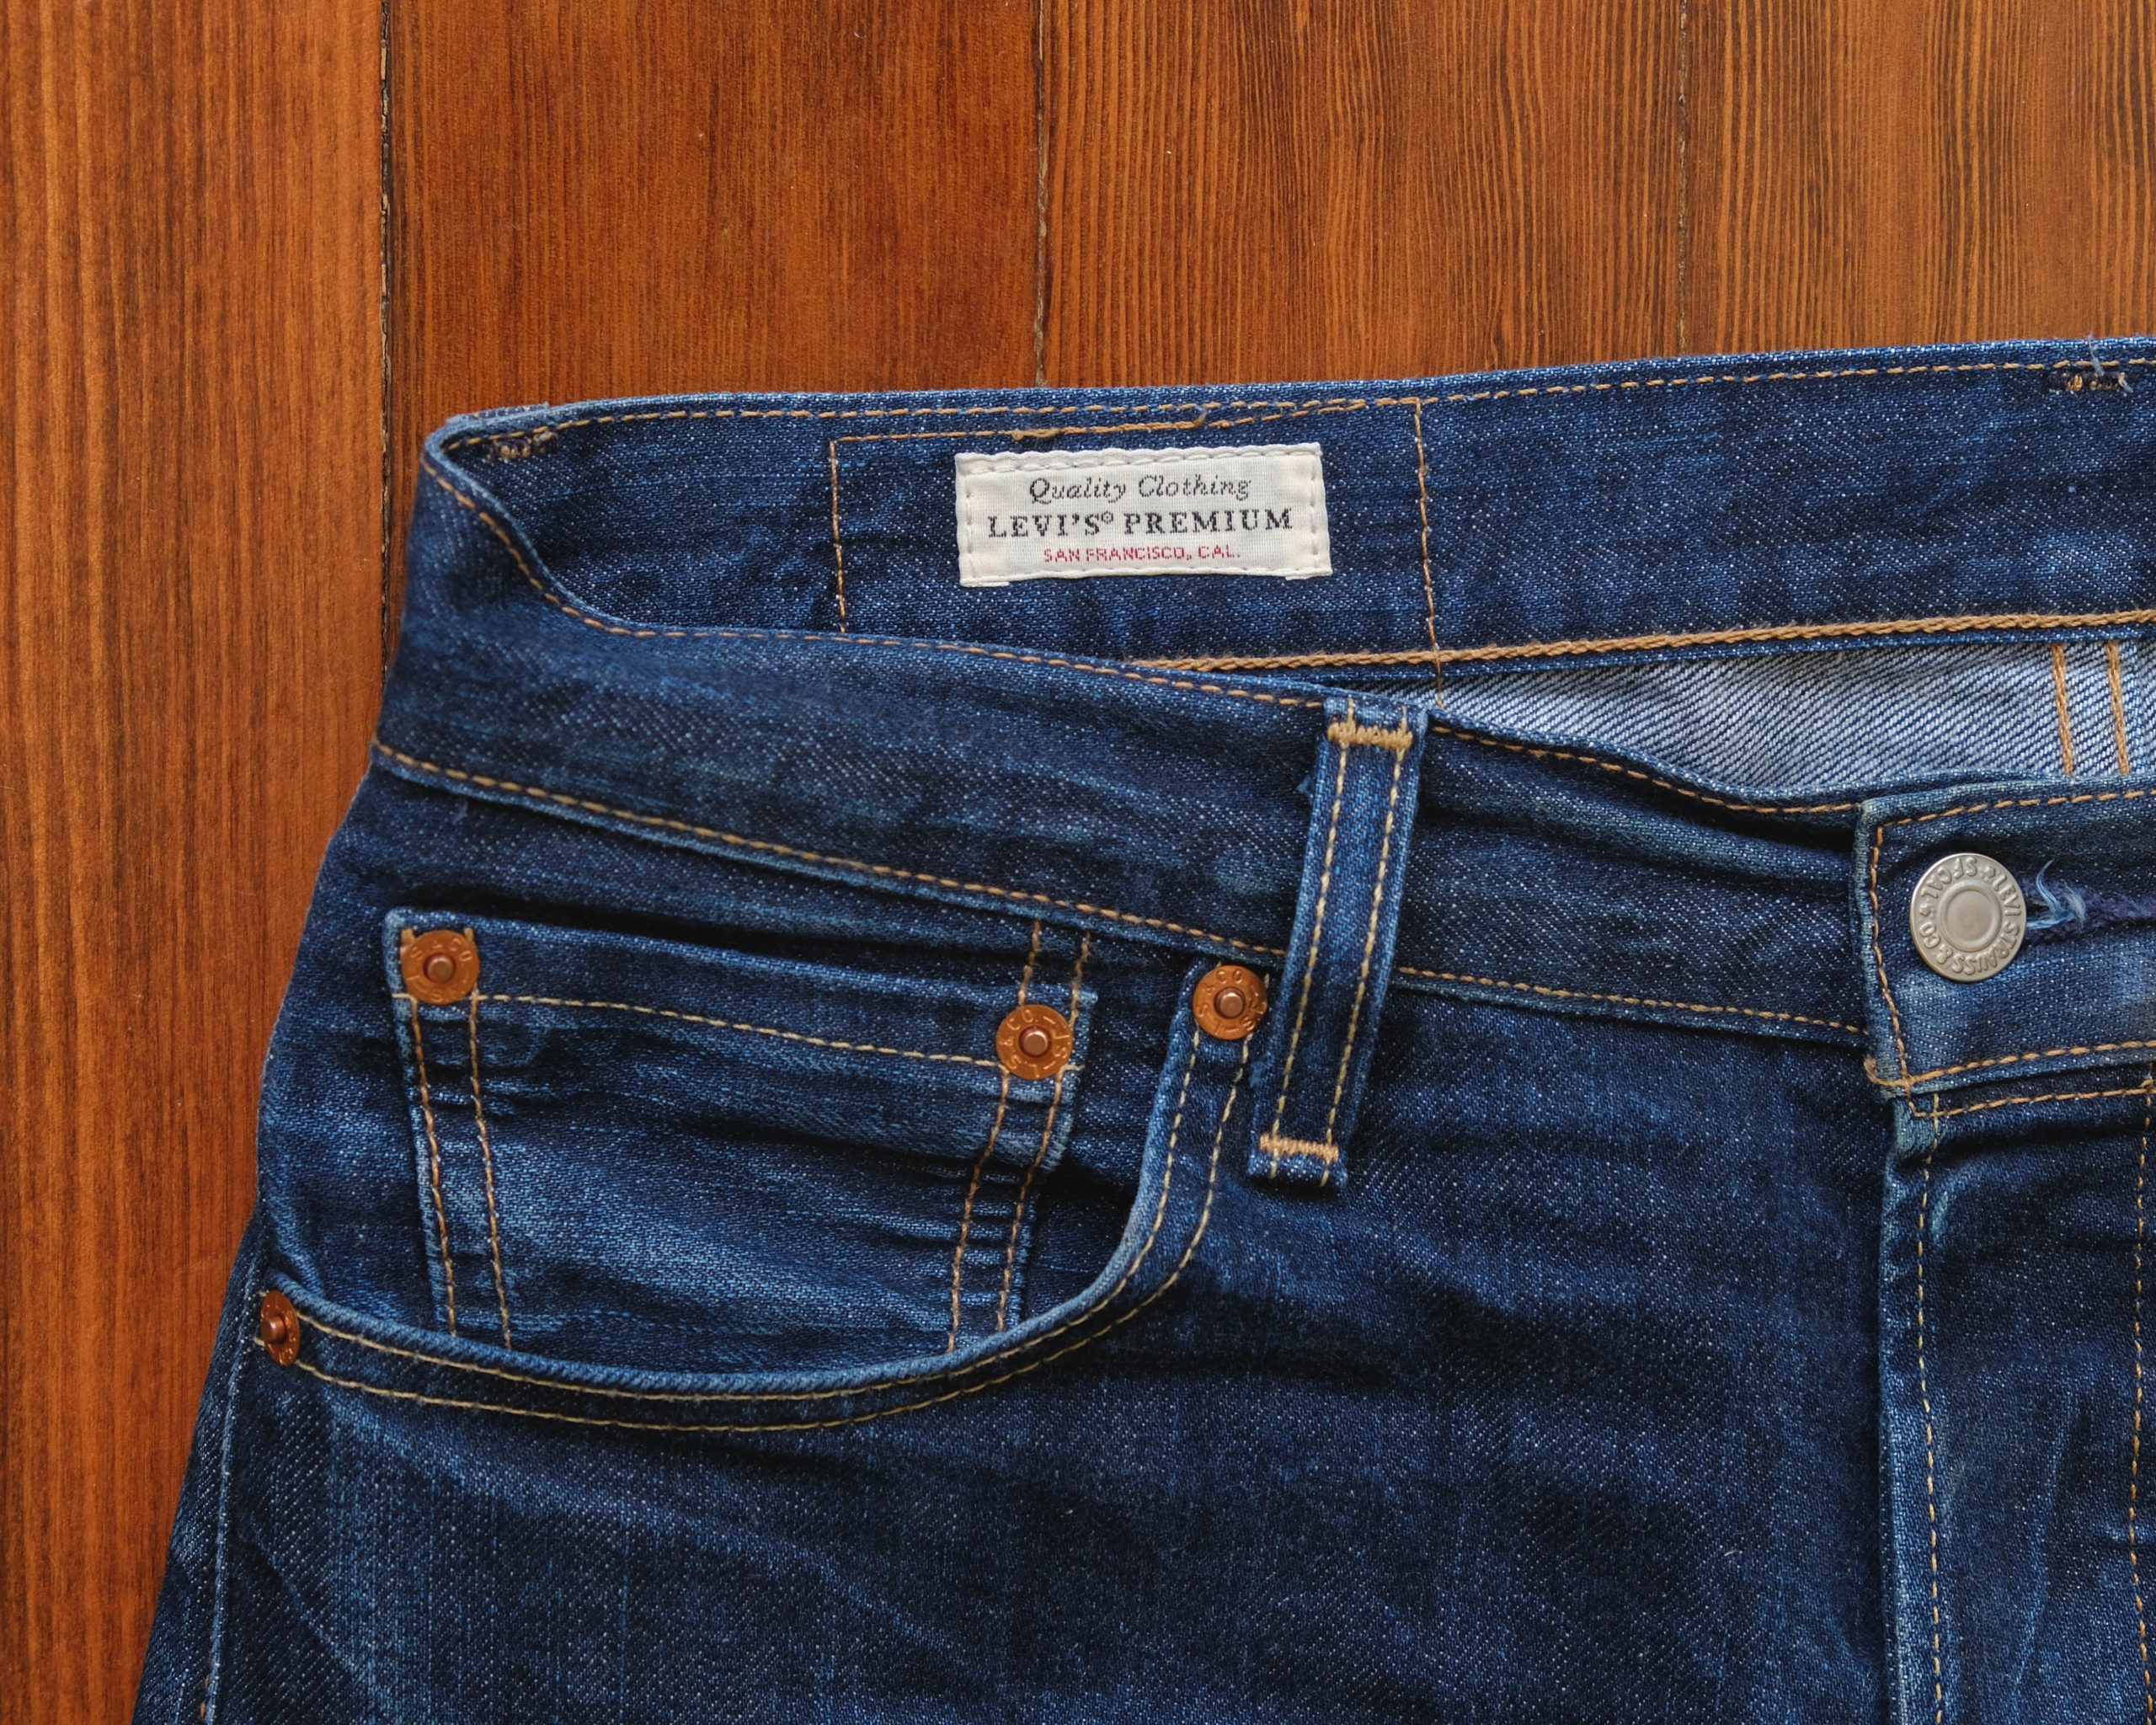 Product Review: Levi's Premium 501 Jeans - From Squalor to Baller